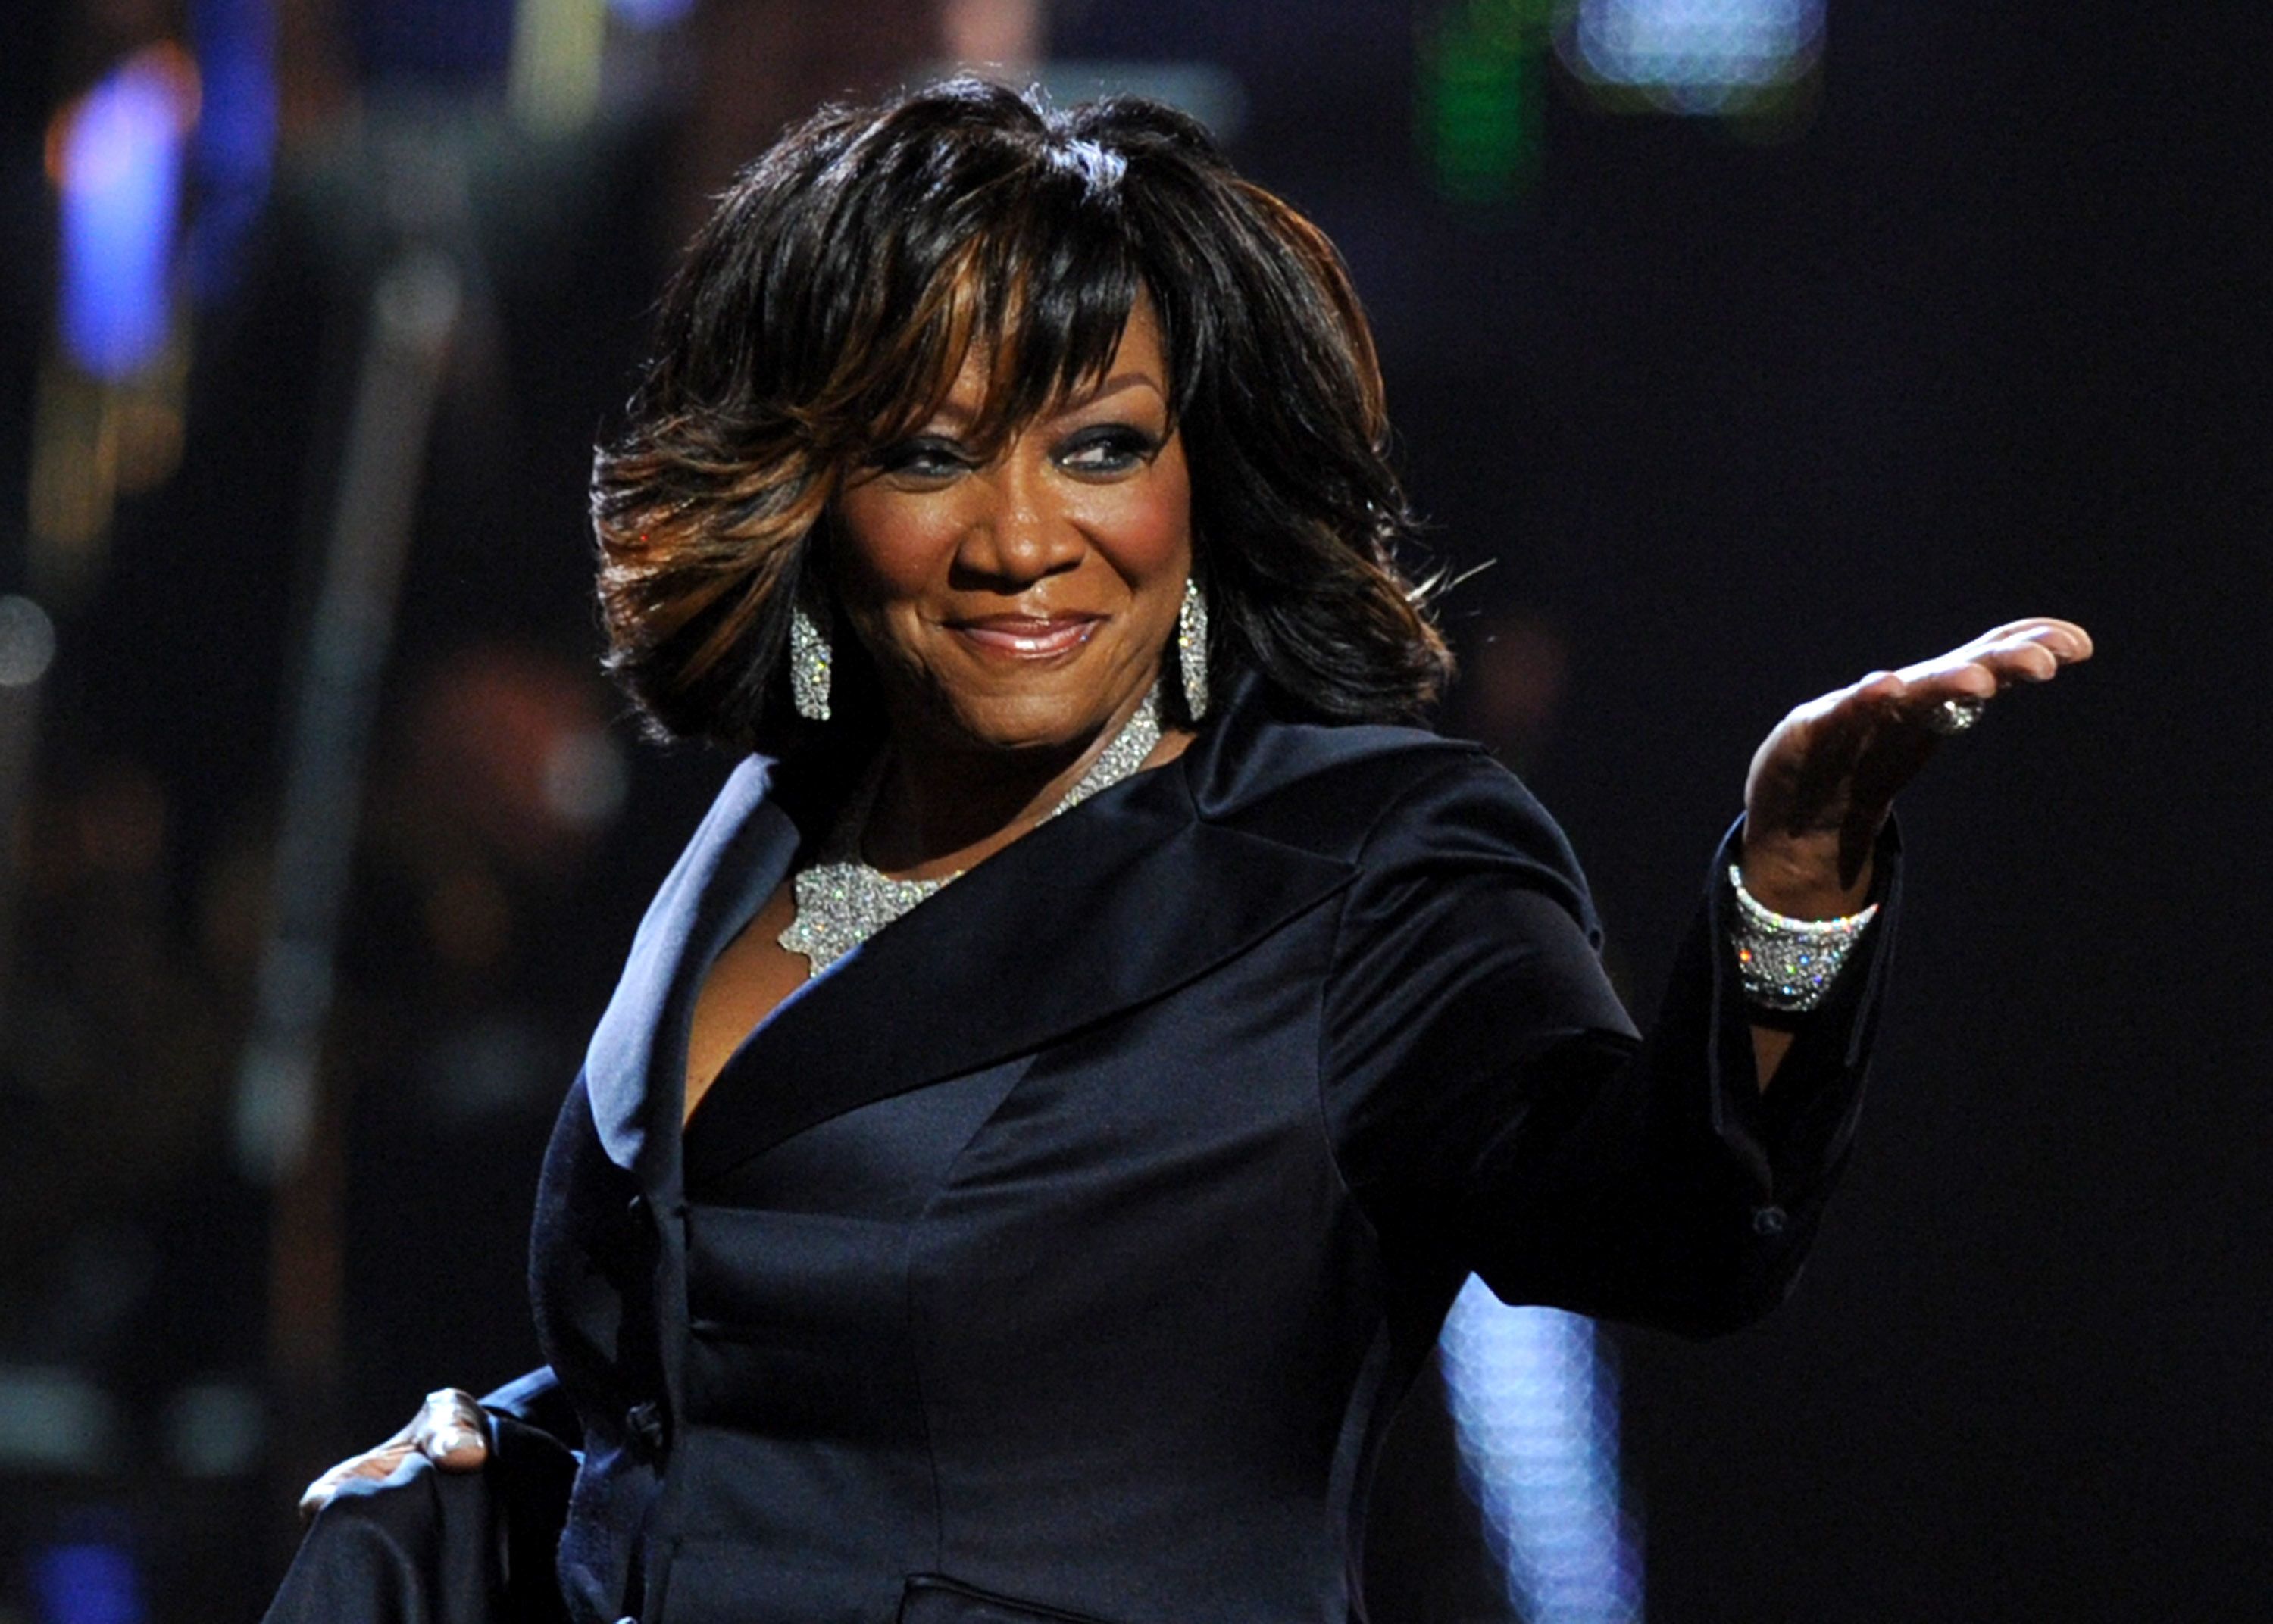 Smiling Patti Labelle wearing a black coat